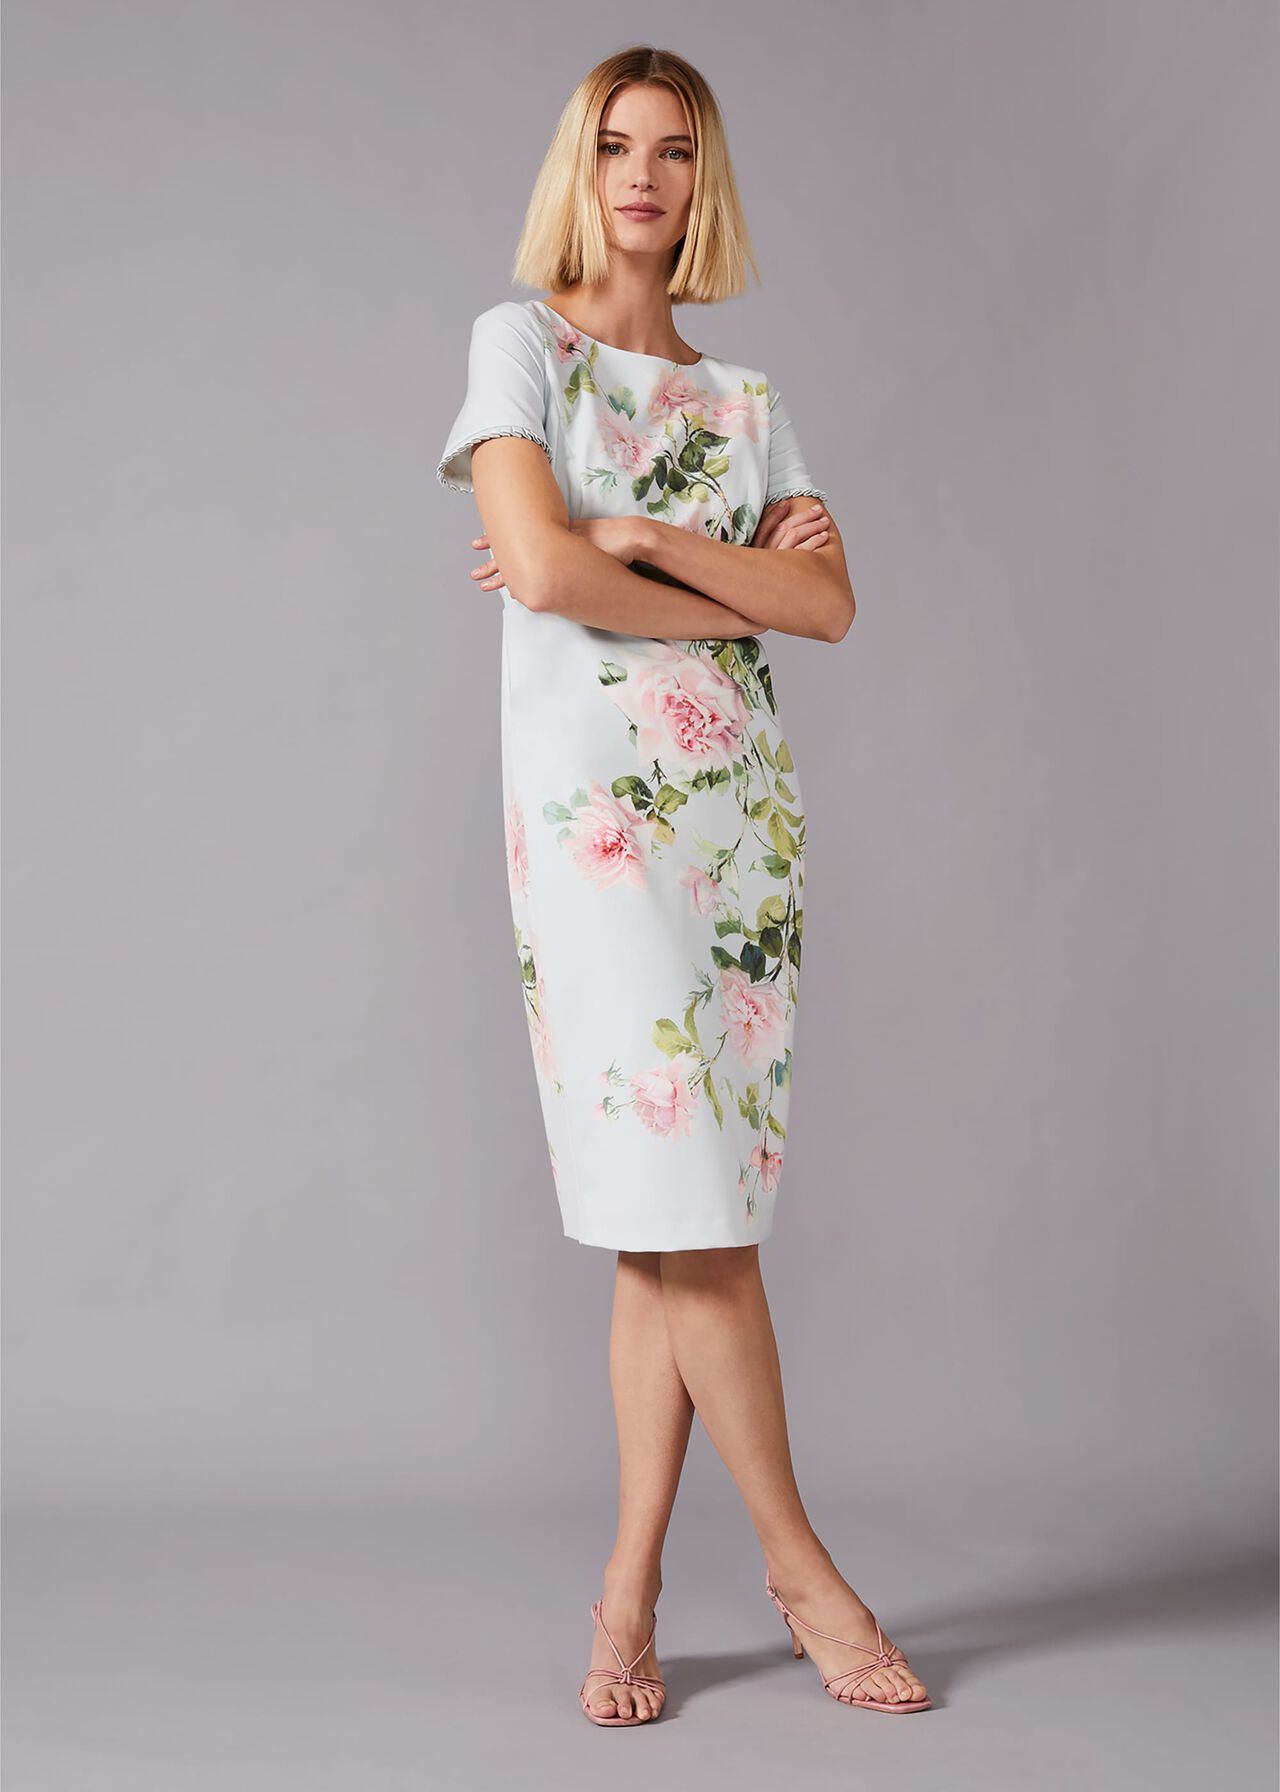 Shanea Fitted Floral Dress